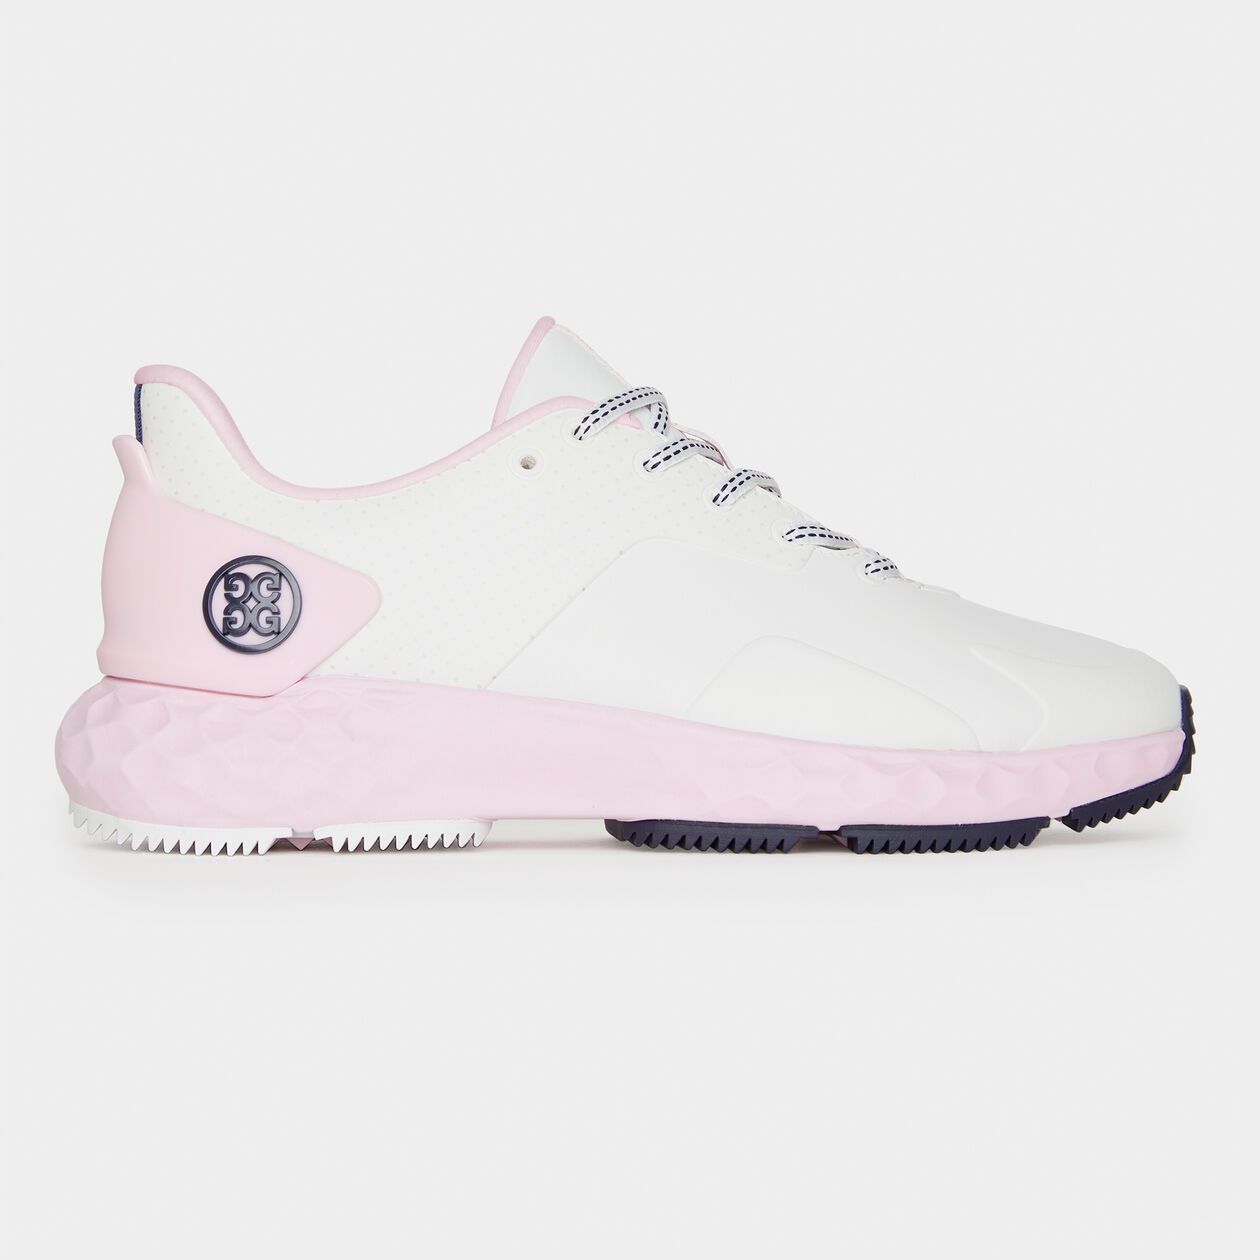 WOMEN'S PERFORATED MG4+ GOLF SHOE | WOMEN'S GOLF SHOES | G/FORE | G/FORE | GFORE.com